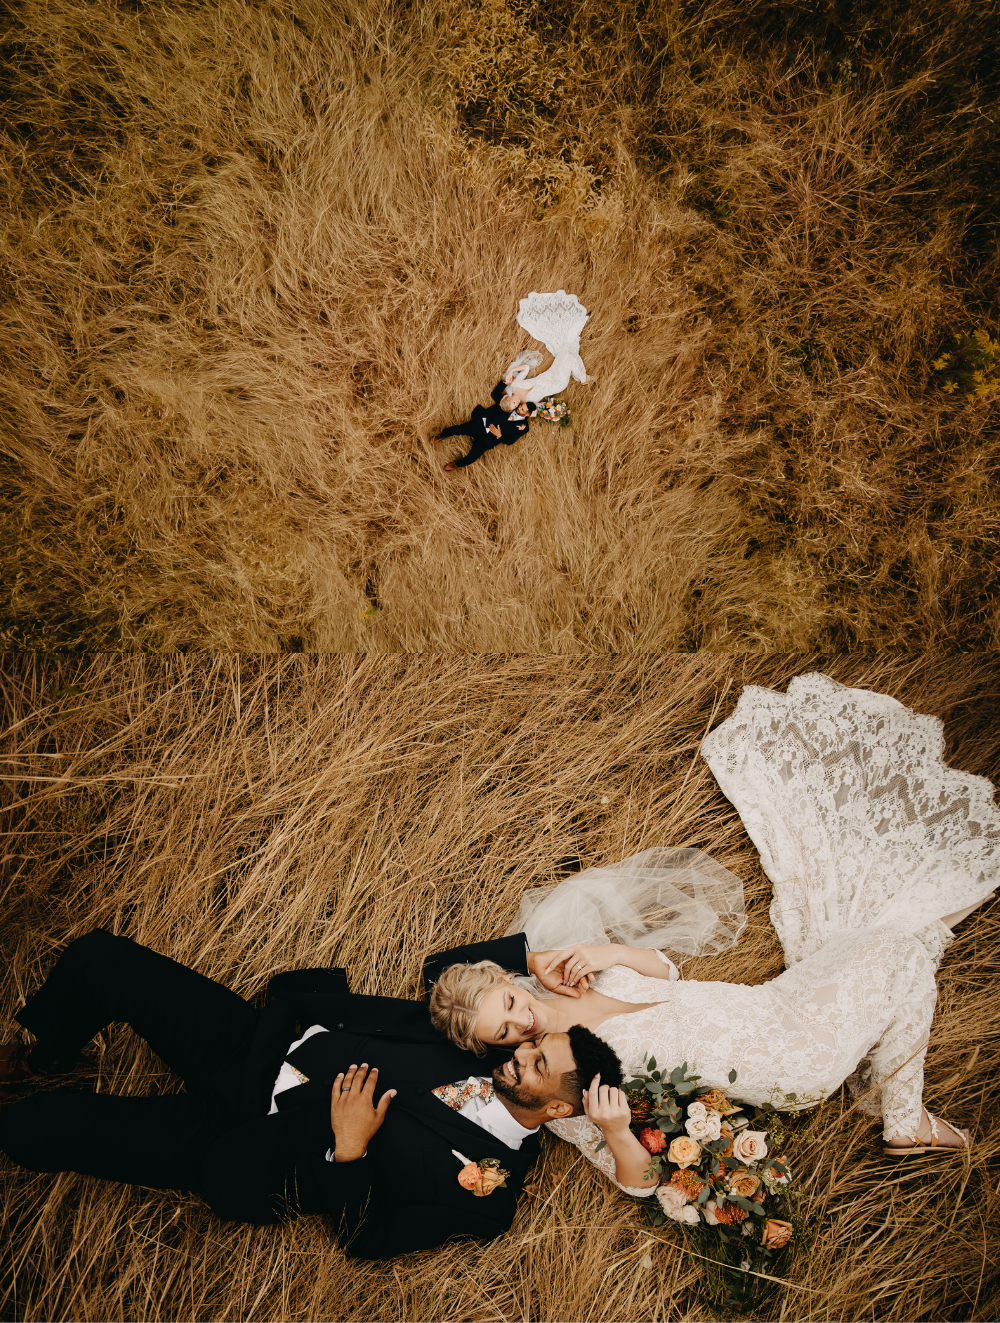 Laying Down Wedding Photos Poses. Drone Wedding Pictures.